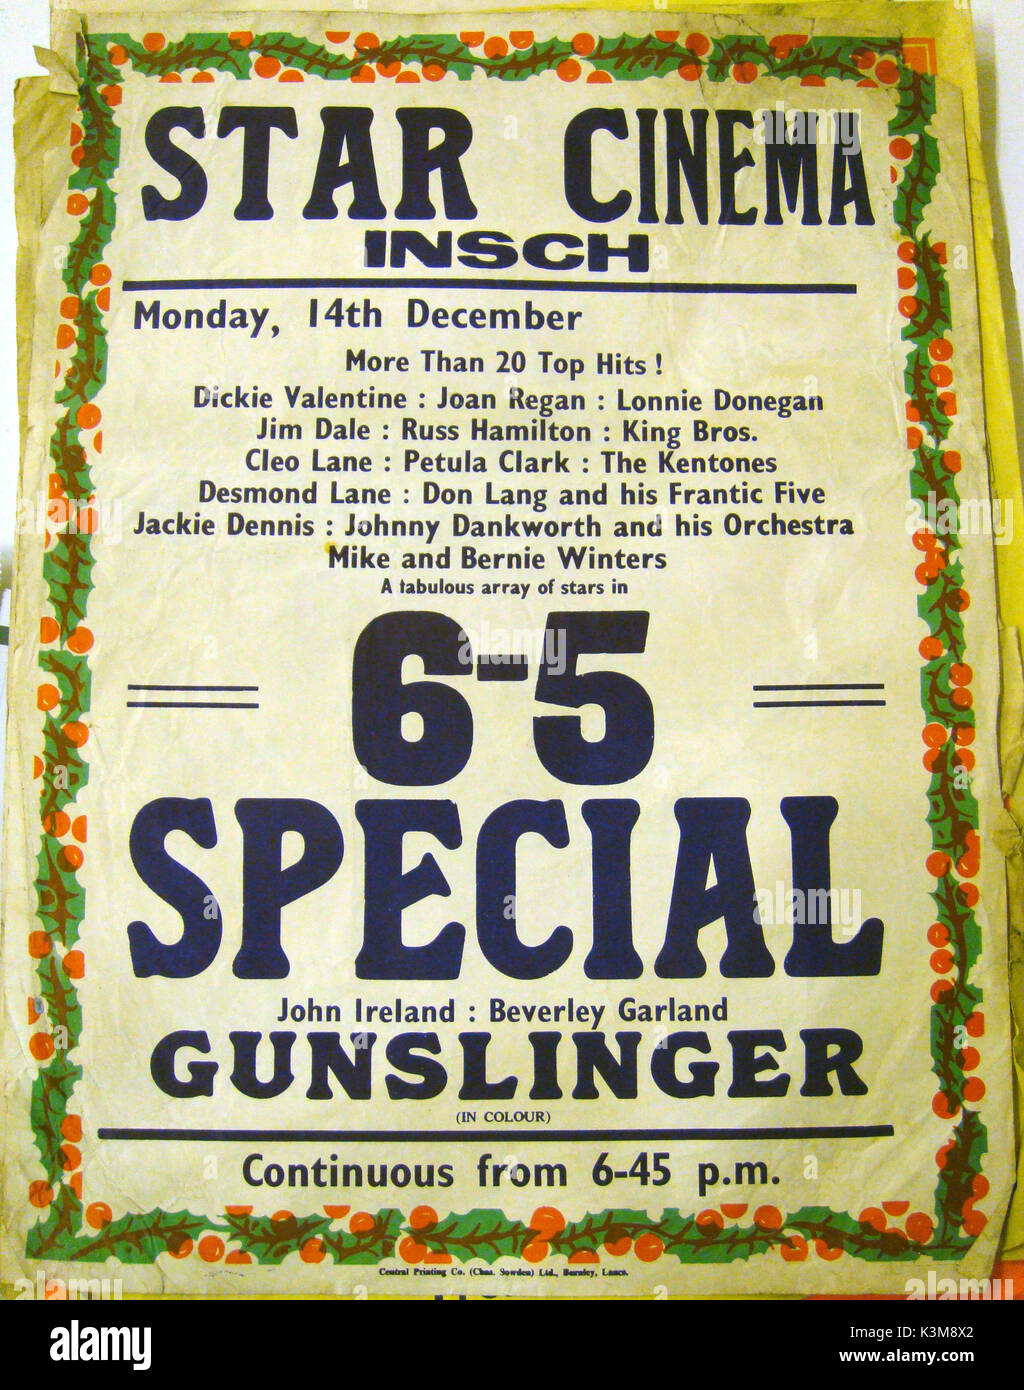 A poster for weekly screenings in the Public Hall, Insch , a village in Aberdeenshire in 1959. These had restarted in 1958 after the closing of the Glen Cinema shows there which had been a weekly event since c1939. These restarted shows were run by Aberdeen based projectionist Ronald Grant who ran what eventually became a 3 hall rural cinema crcuit under the Suburban Cinemas name.     Date: Stock Photo